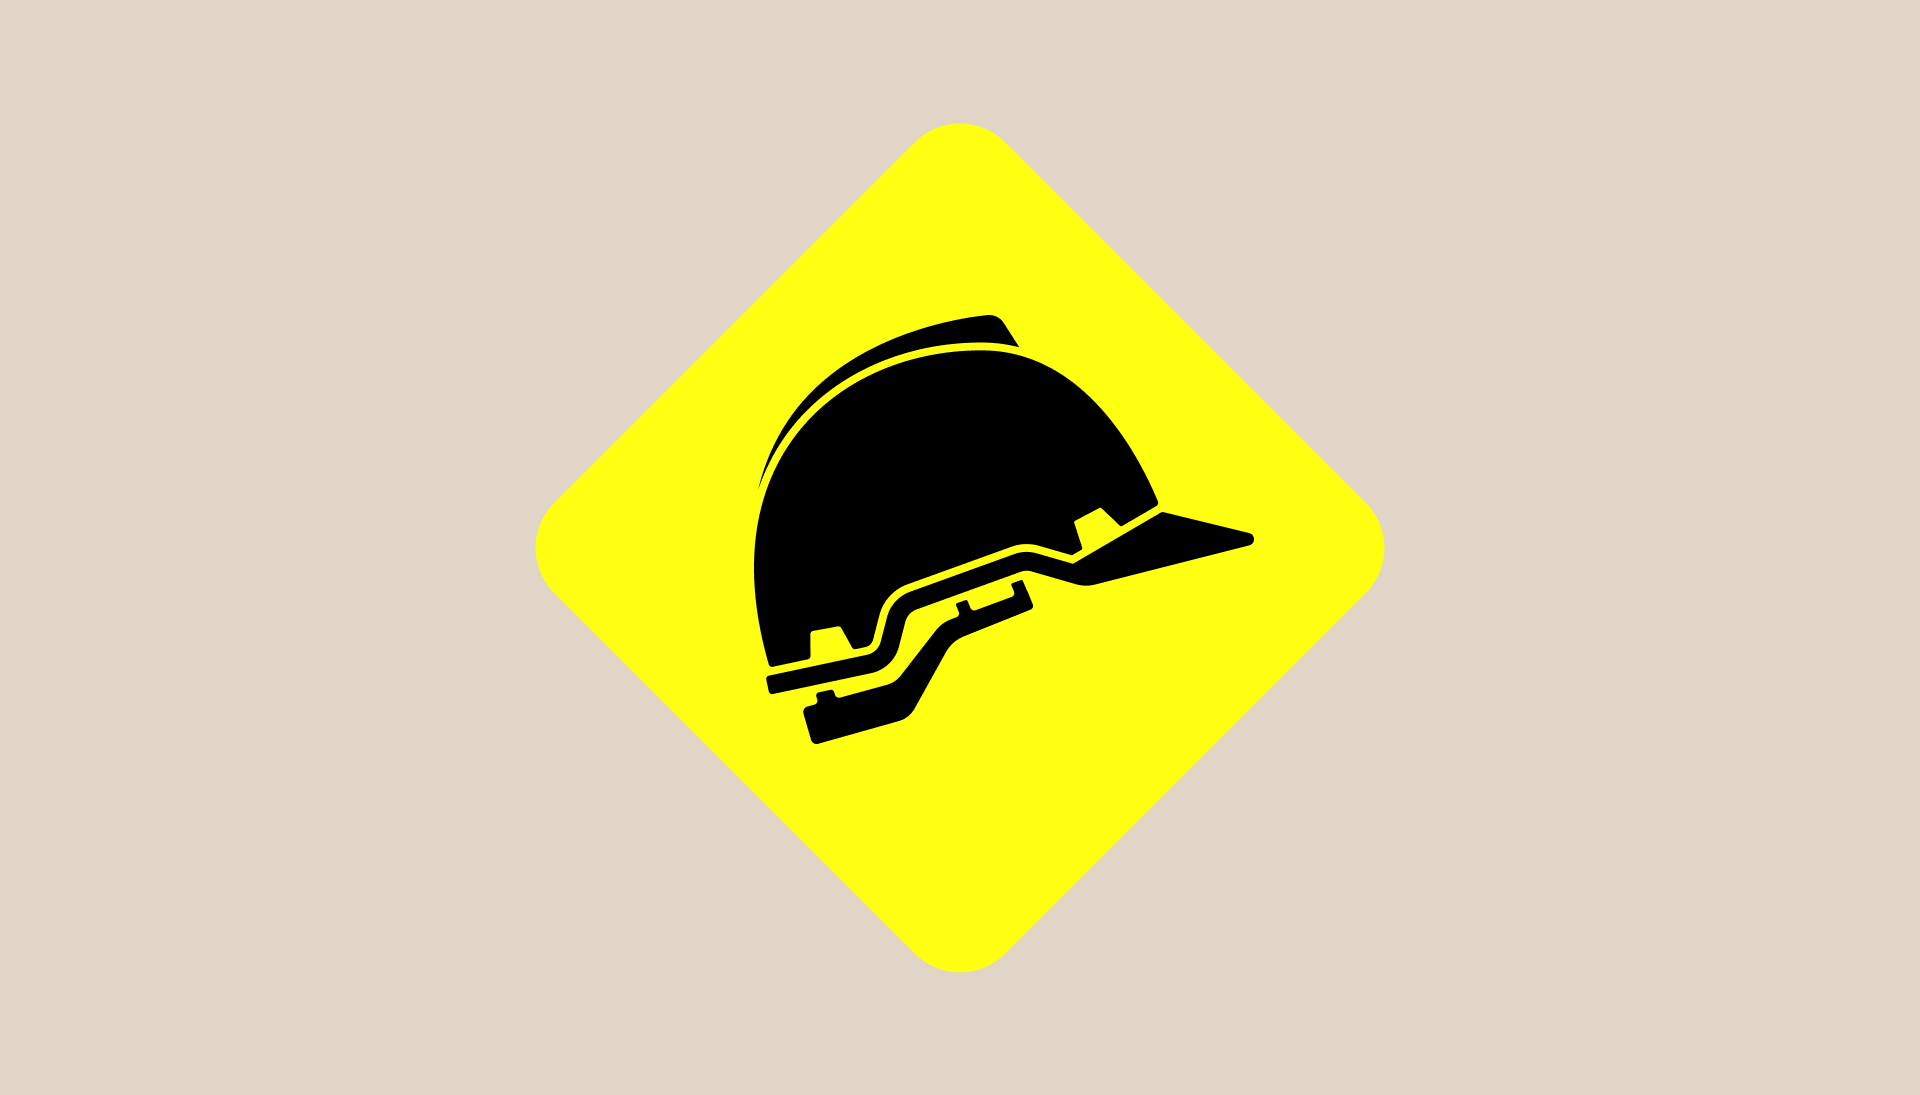 An icon of a construction hard hat